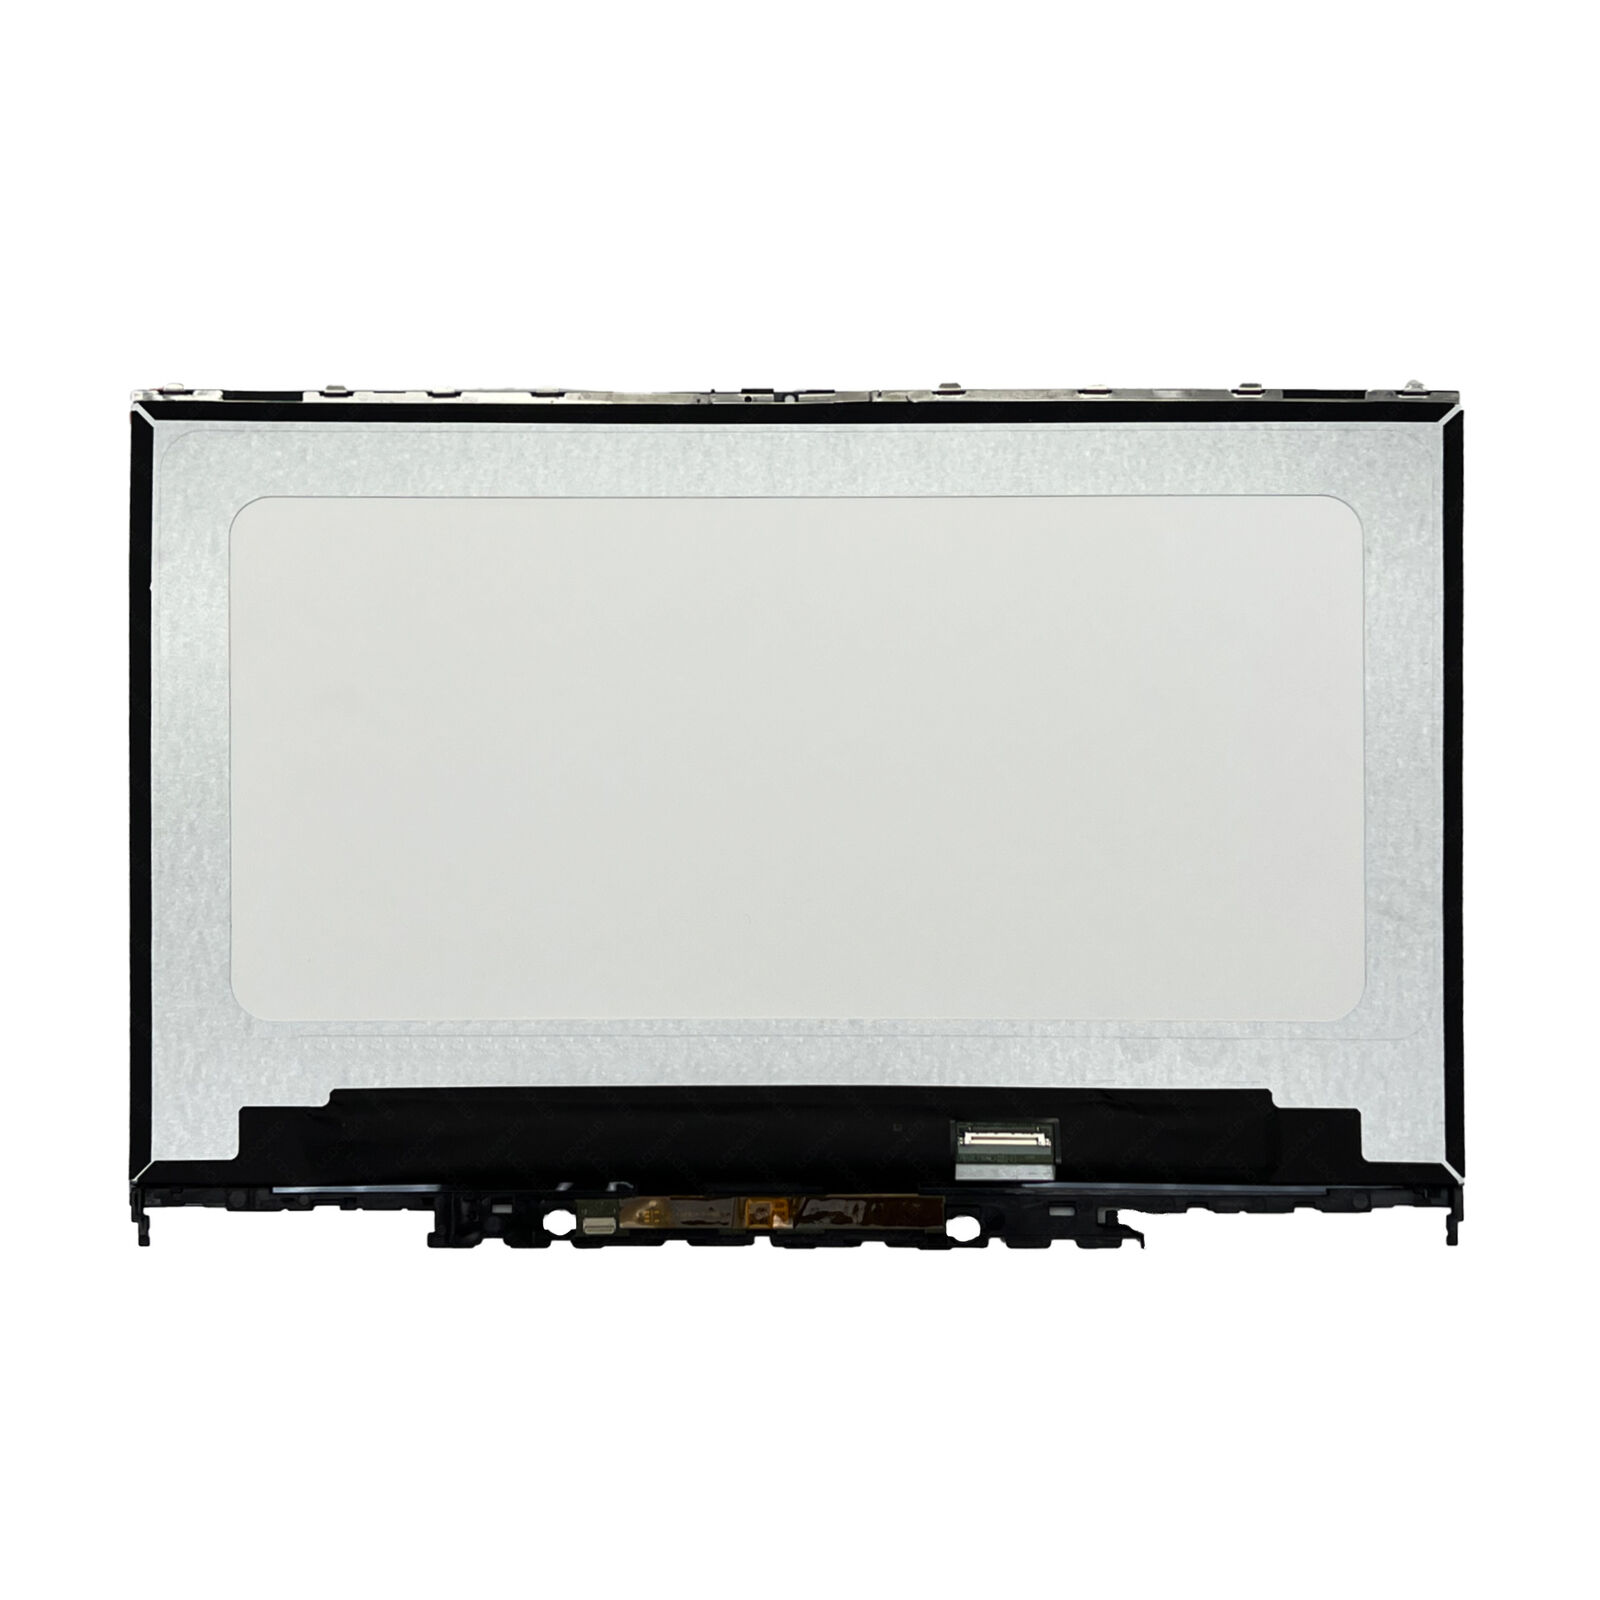 LCD Touch Screen Digitizer for Dell Inspiron 14 5410 7415 2-in-1 P147G P147G001